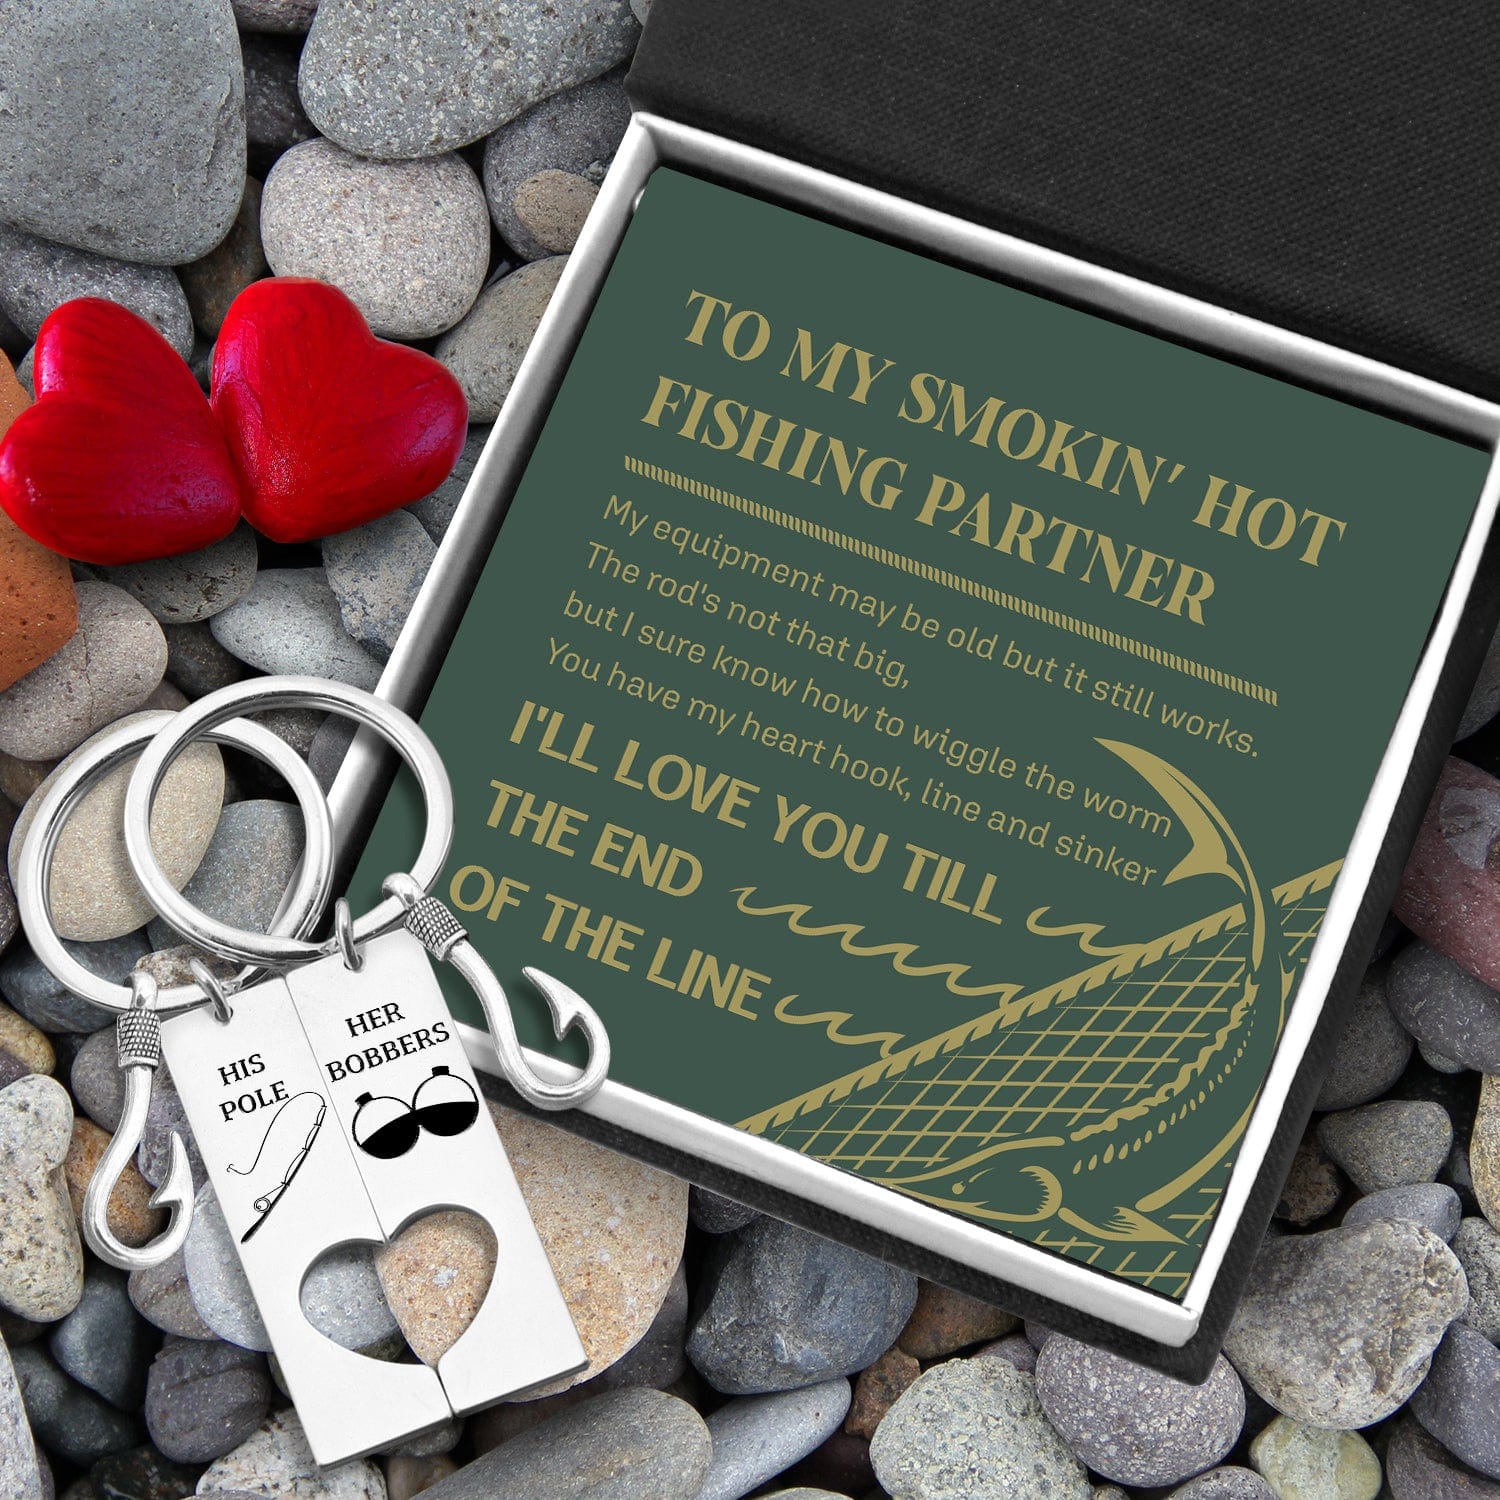 Wrapsify Fishing Heart Couple Keychains - Fishing - to My Fishing Partner - I Will Love You Till The End of The Line - Gkcx13002 Standard Box